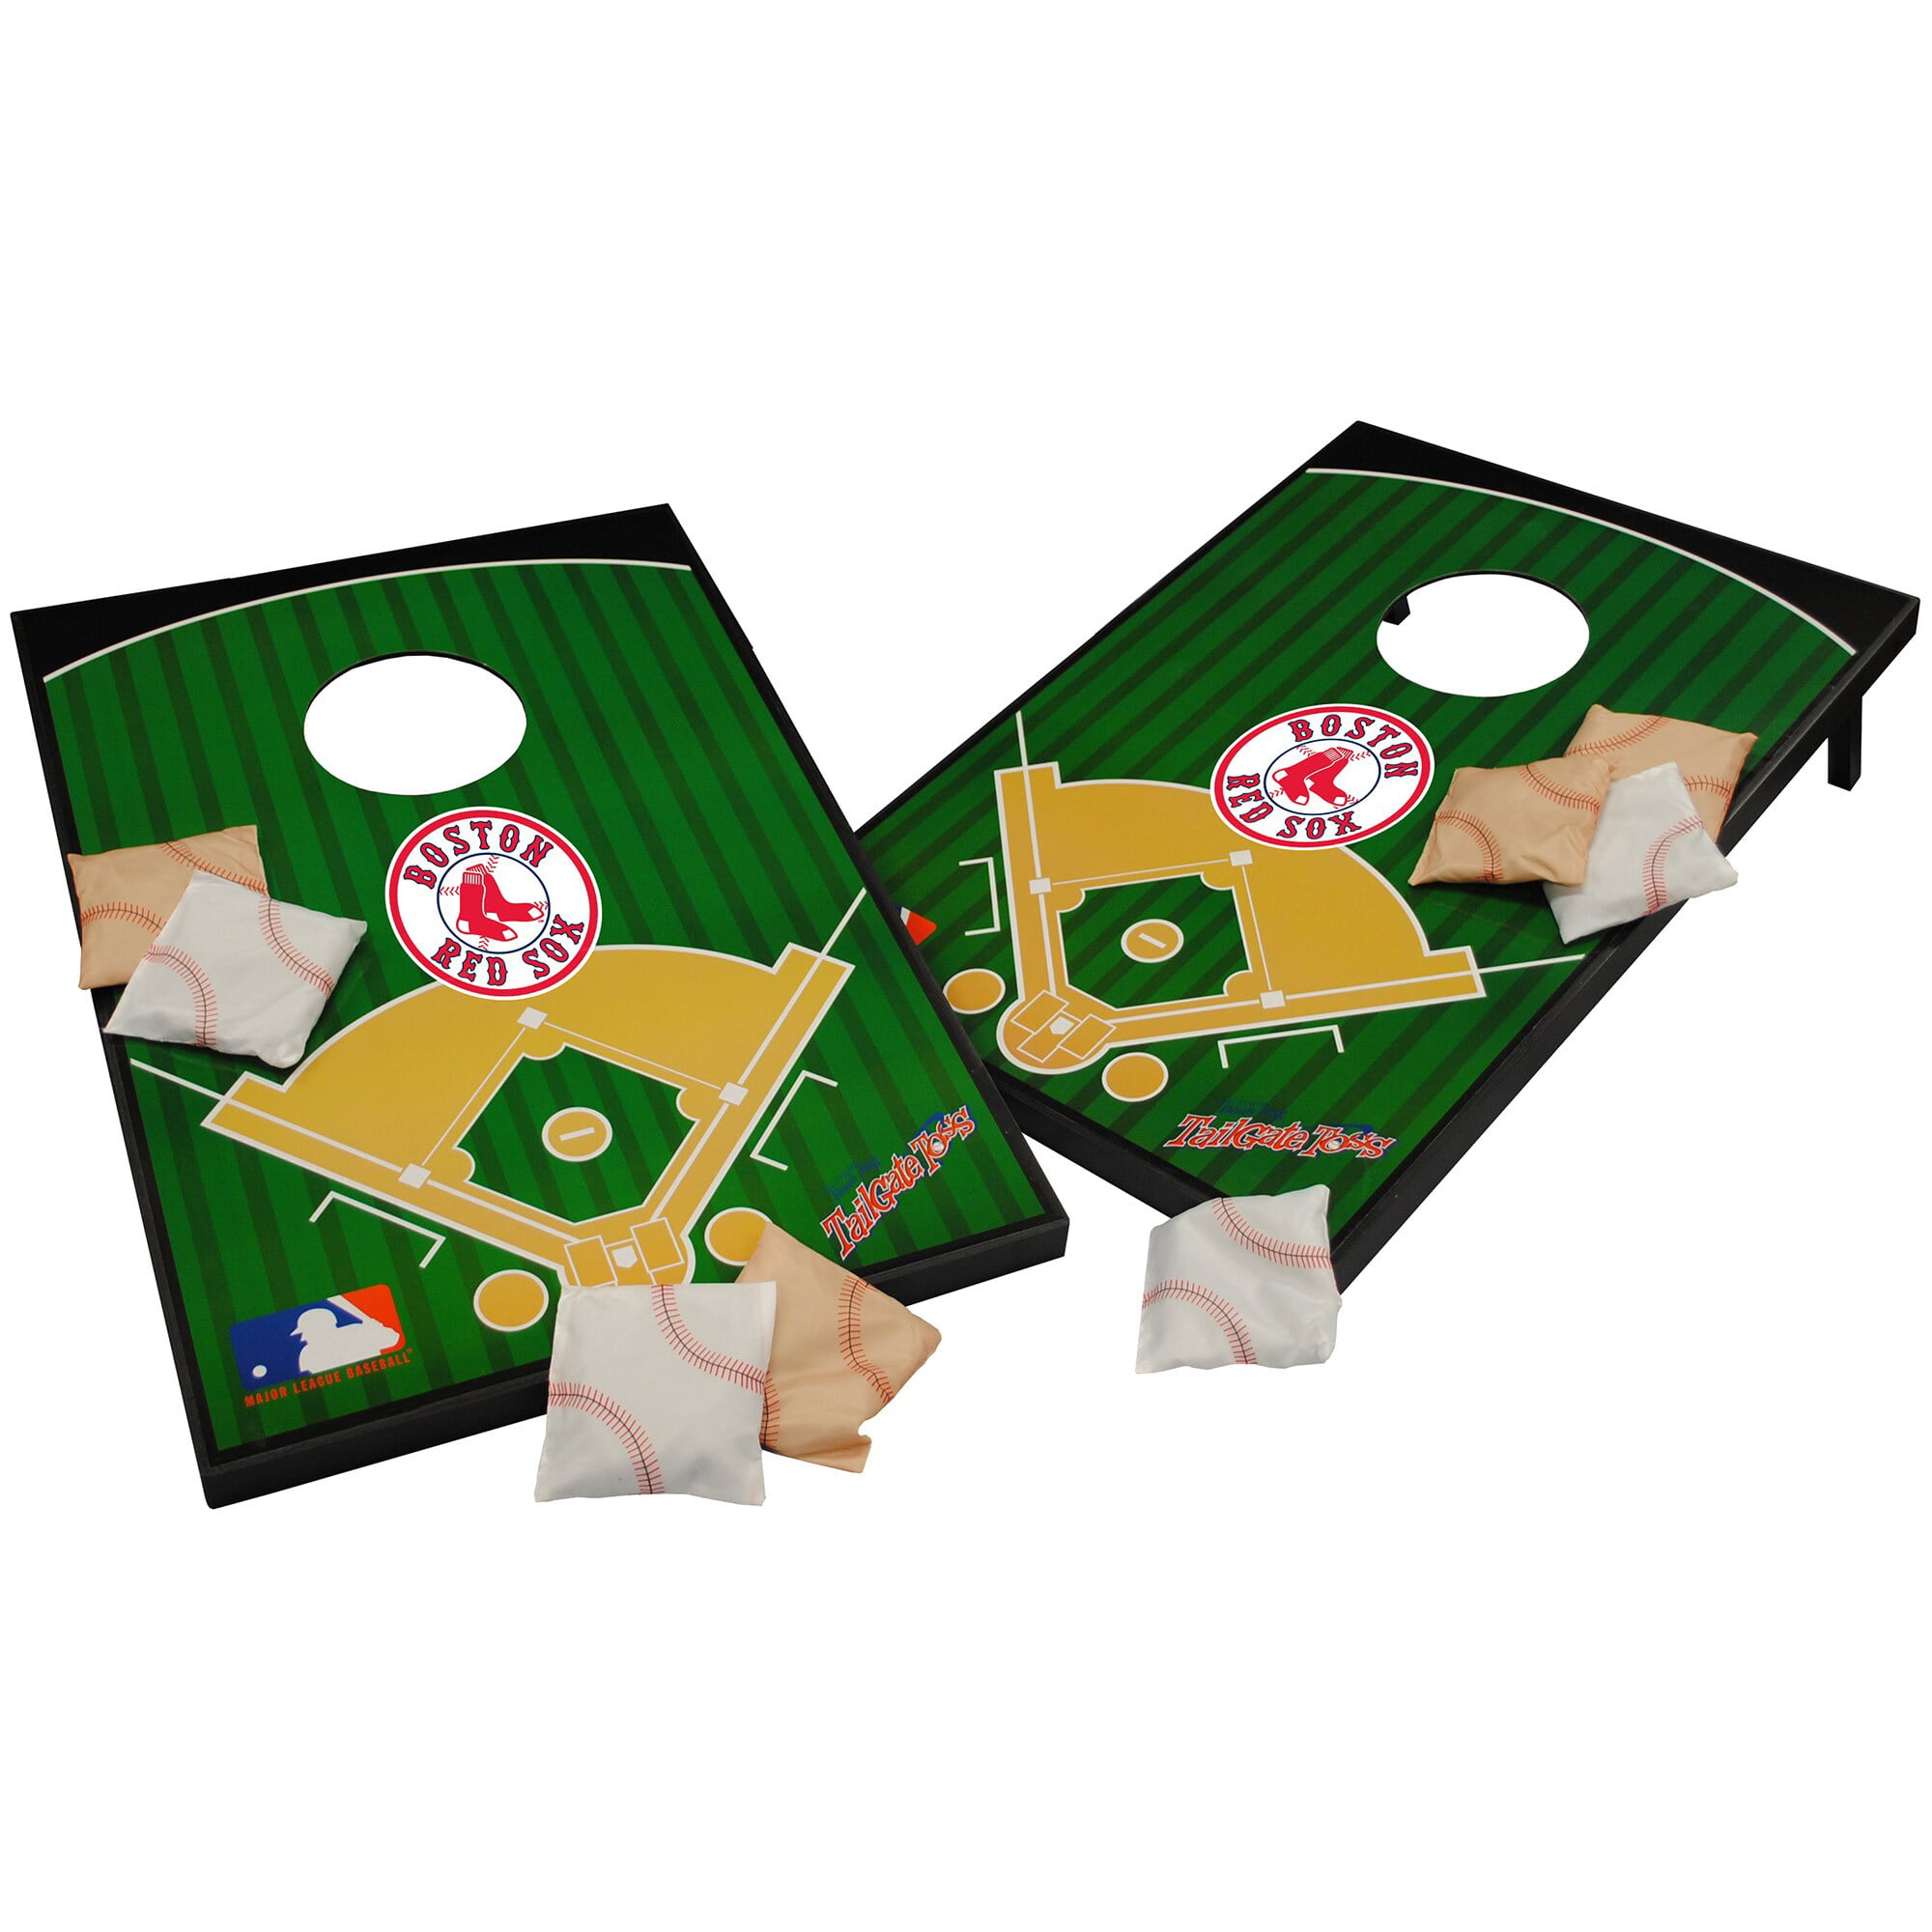 Corn or Pellets! 8 Quality Embroidered Cornhole Bags Red Sox Bs and Hanging Sox 